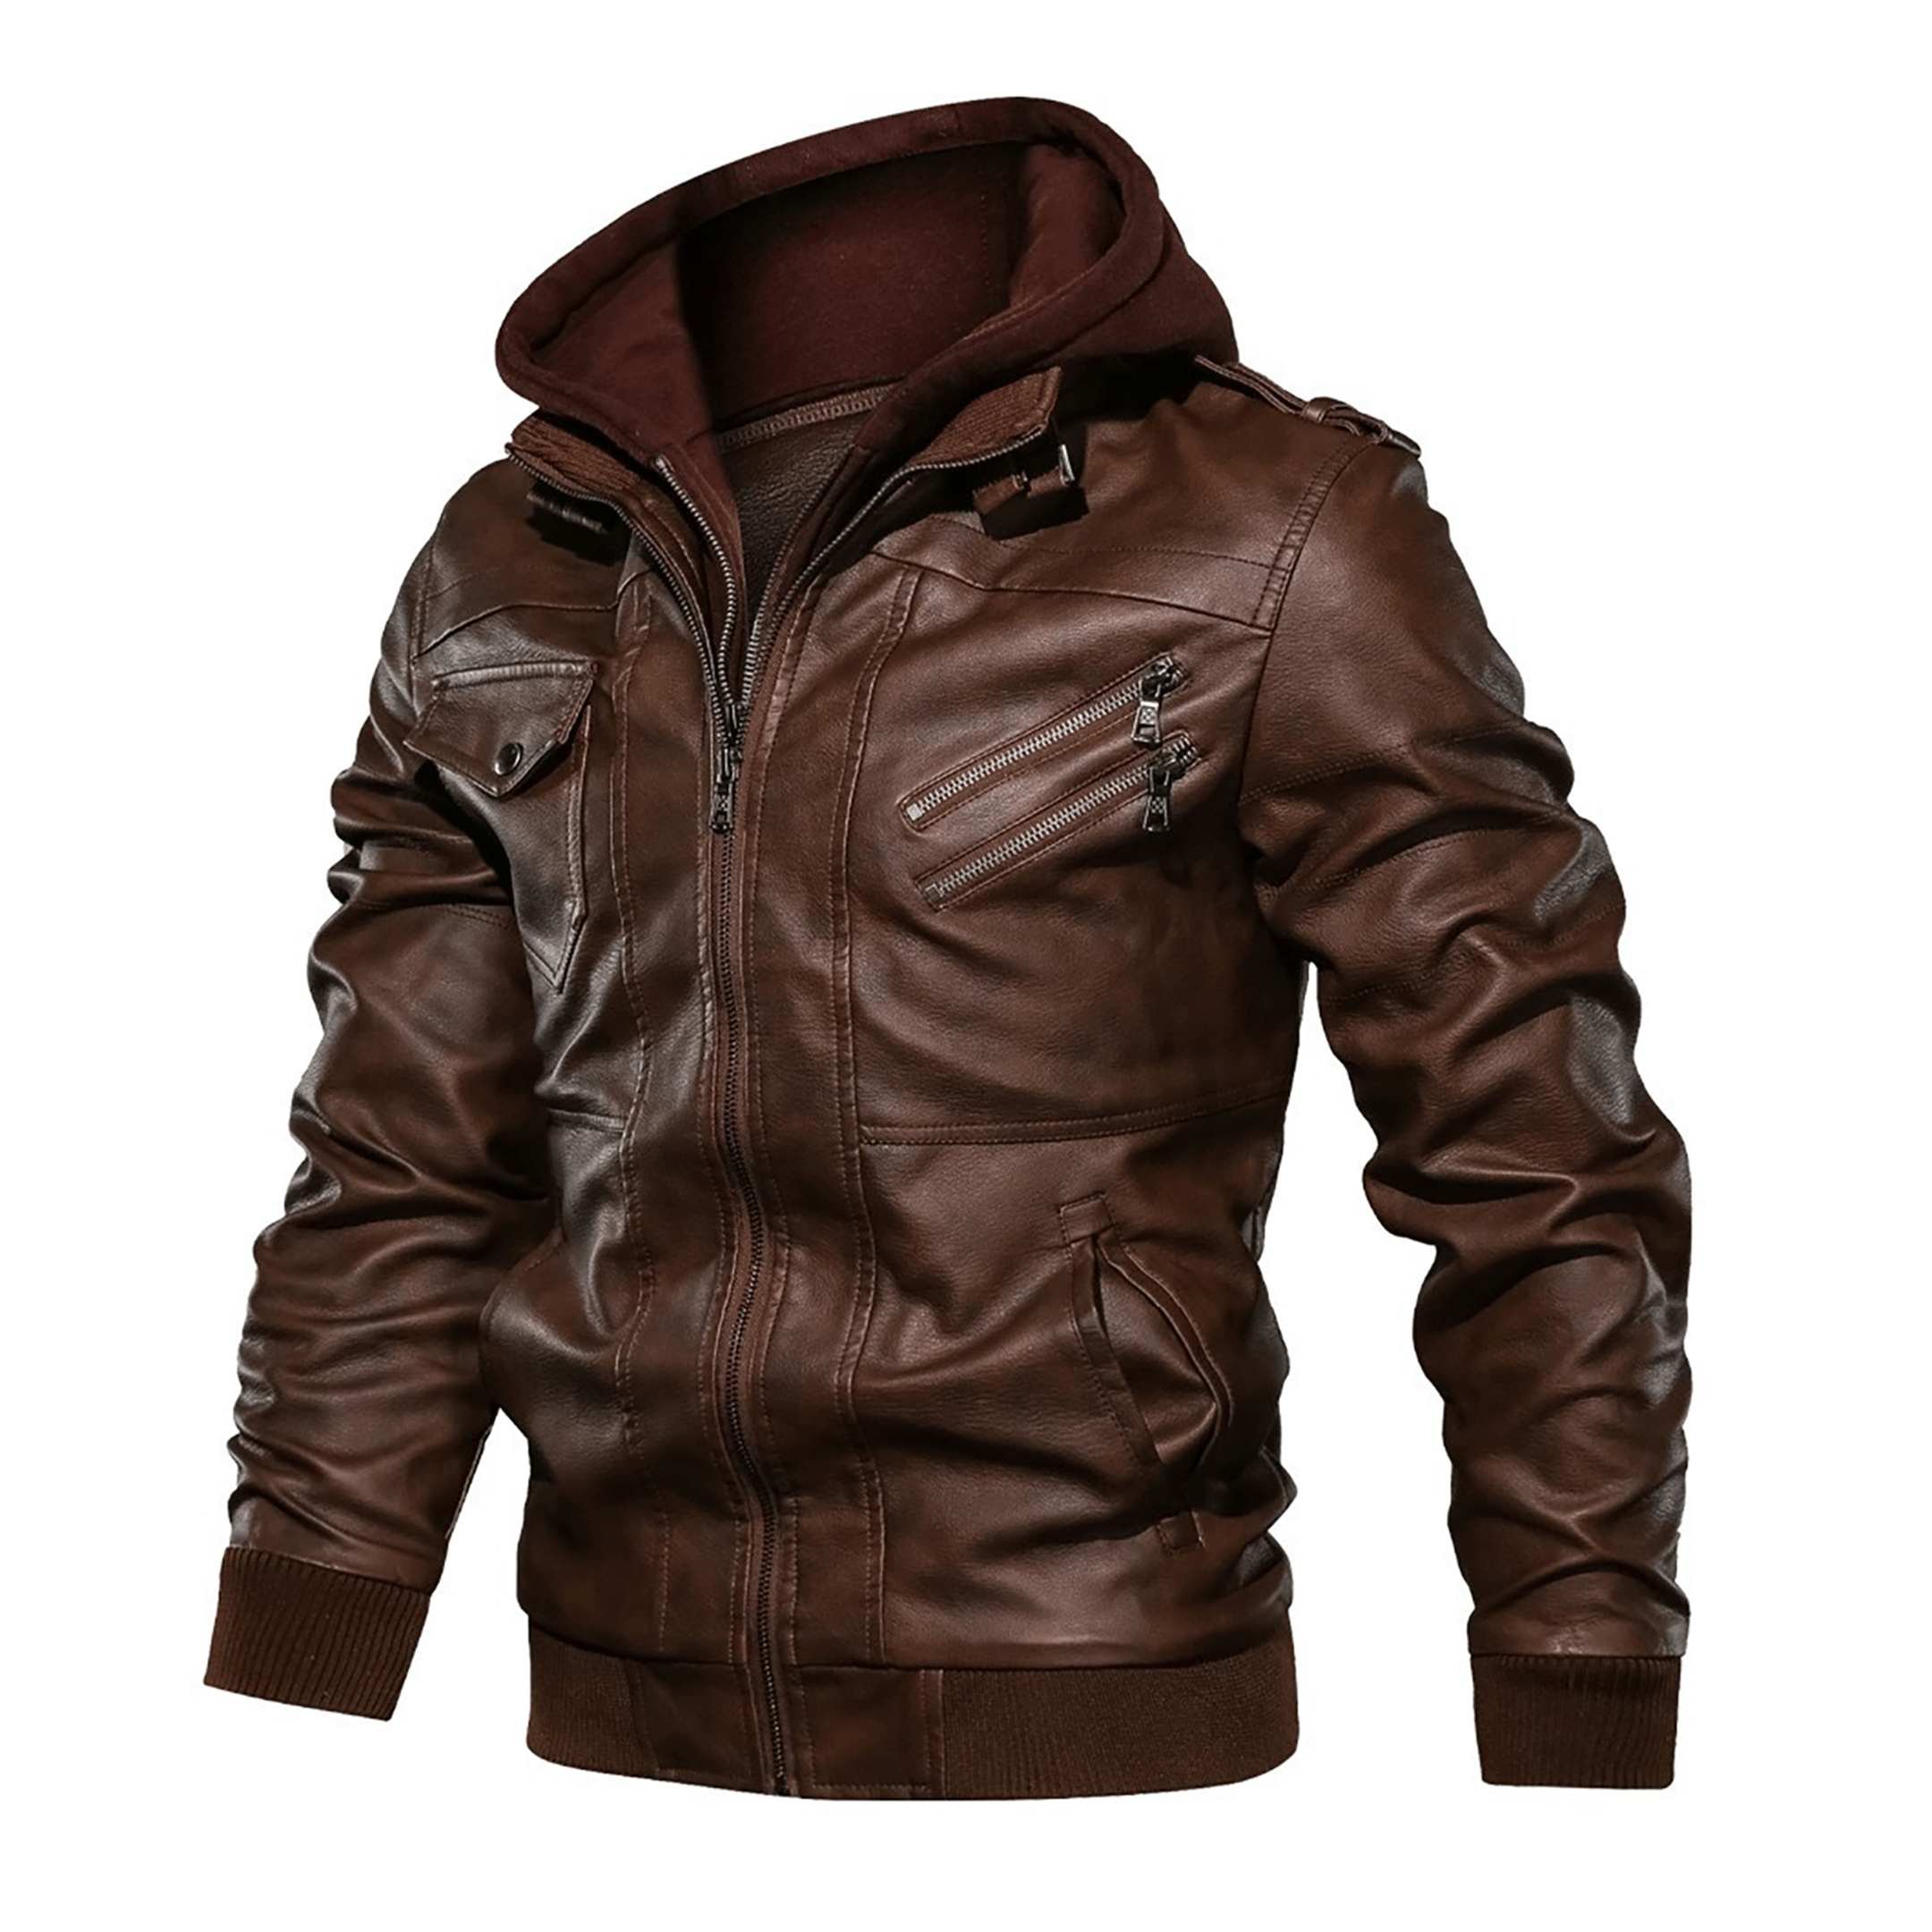 Top leather jackets and latest products 203